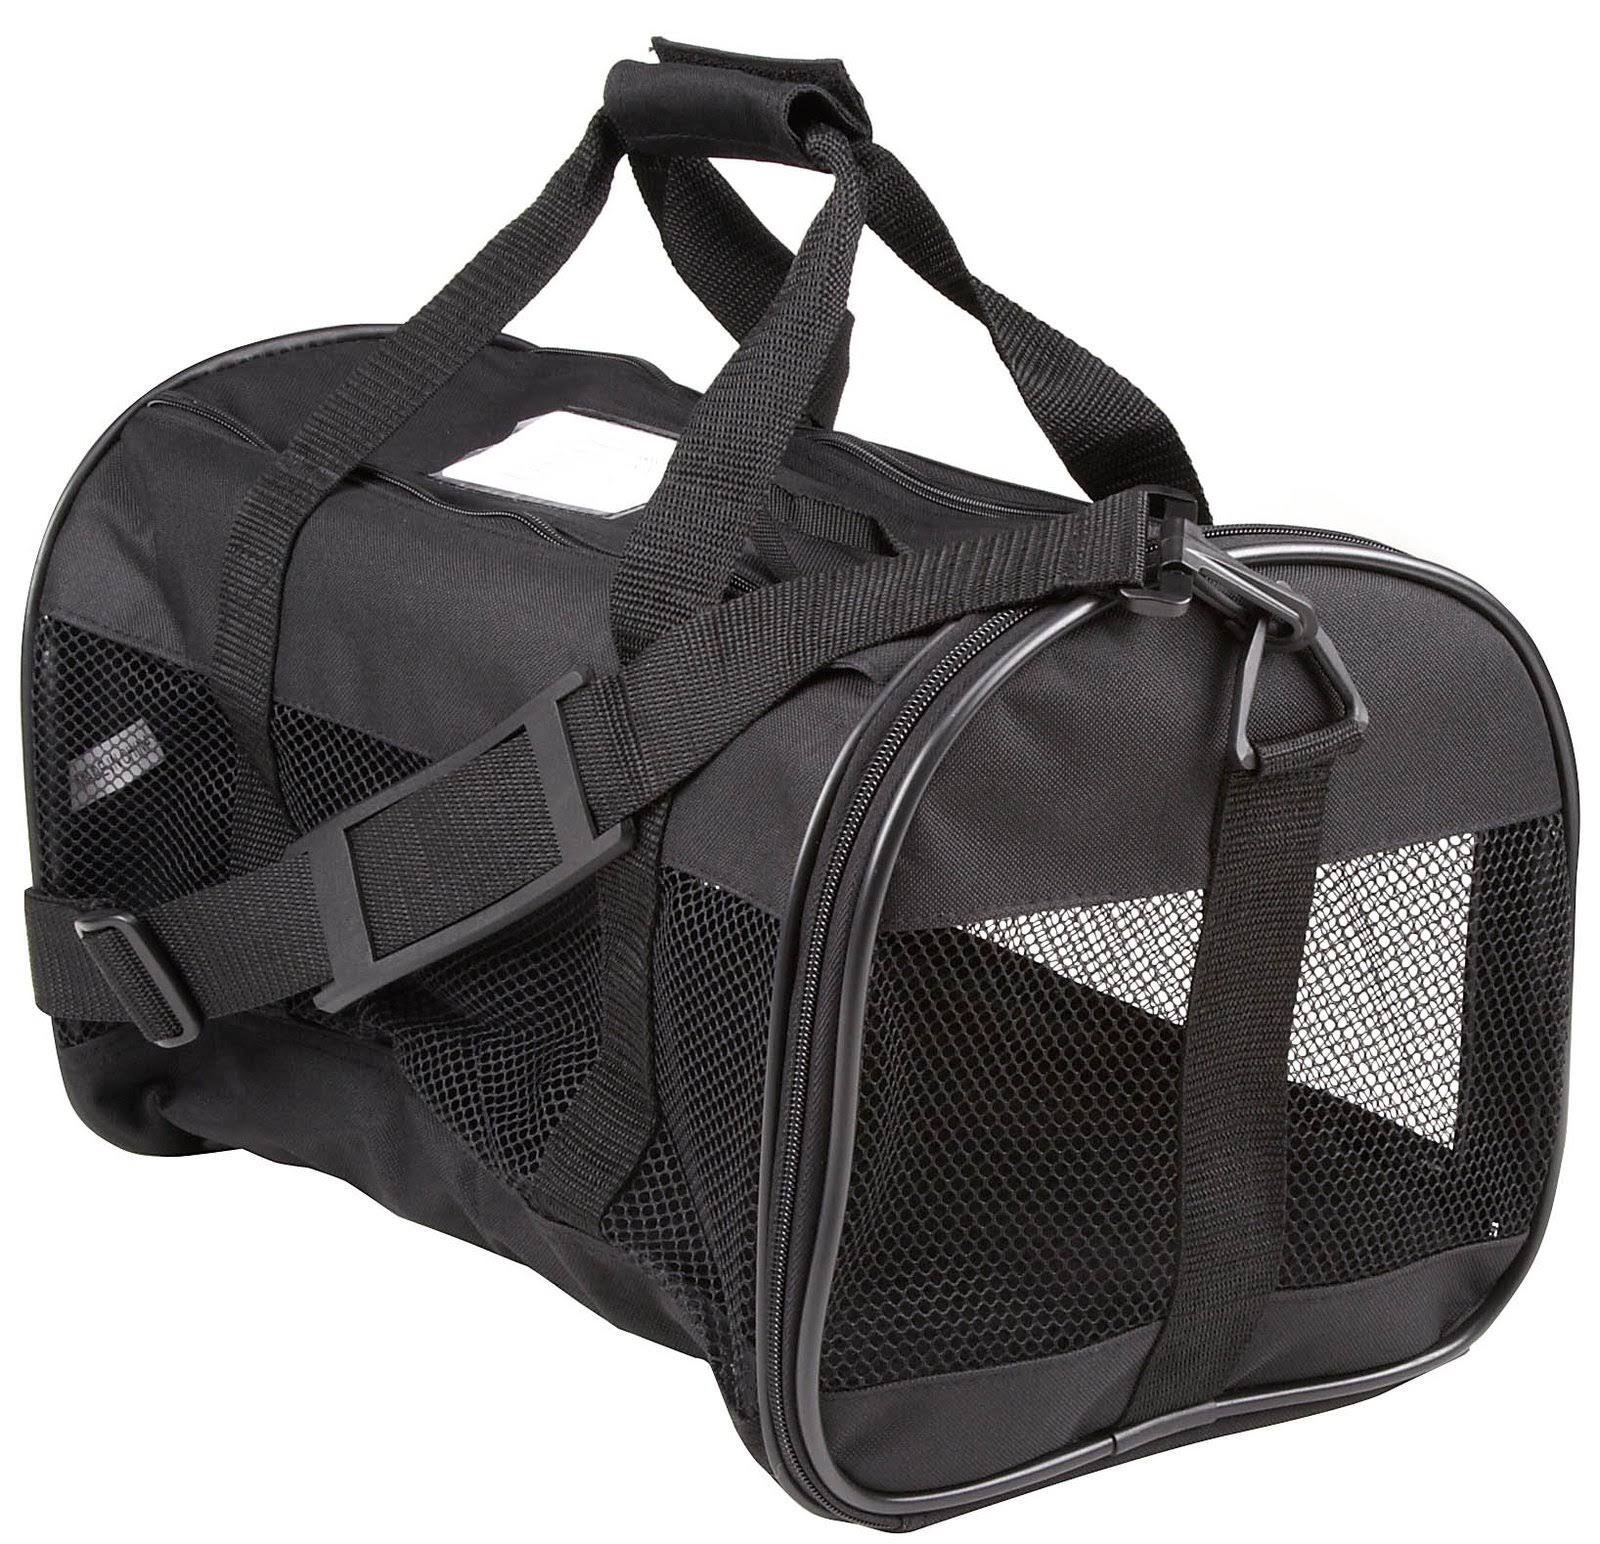 Petmate Soft-Sided Kennel Cab Pet Carrier - Black, 17" X 10" X 10"